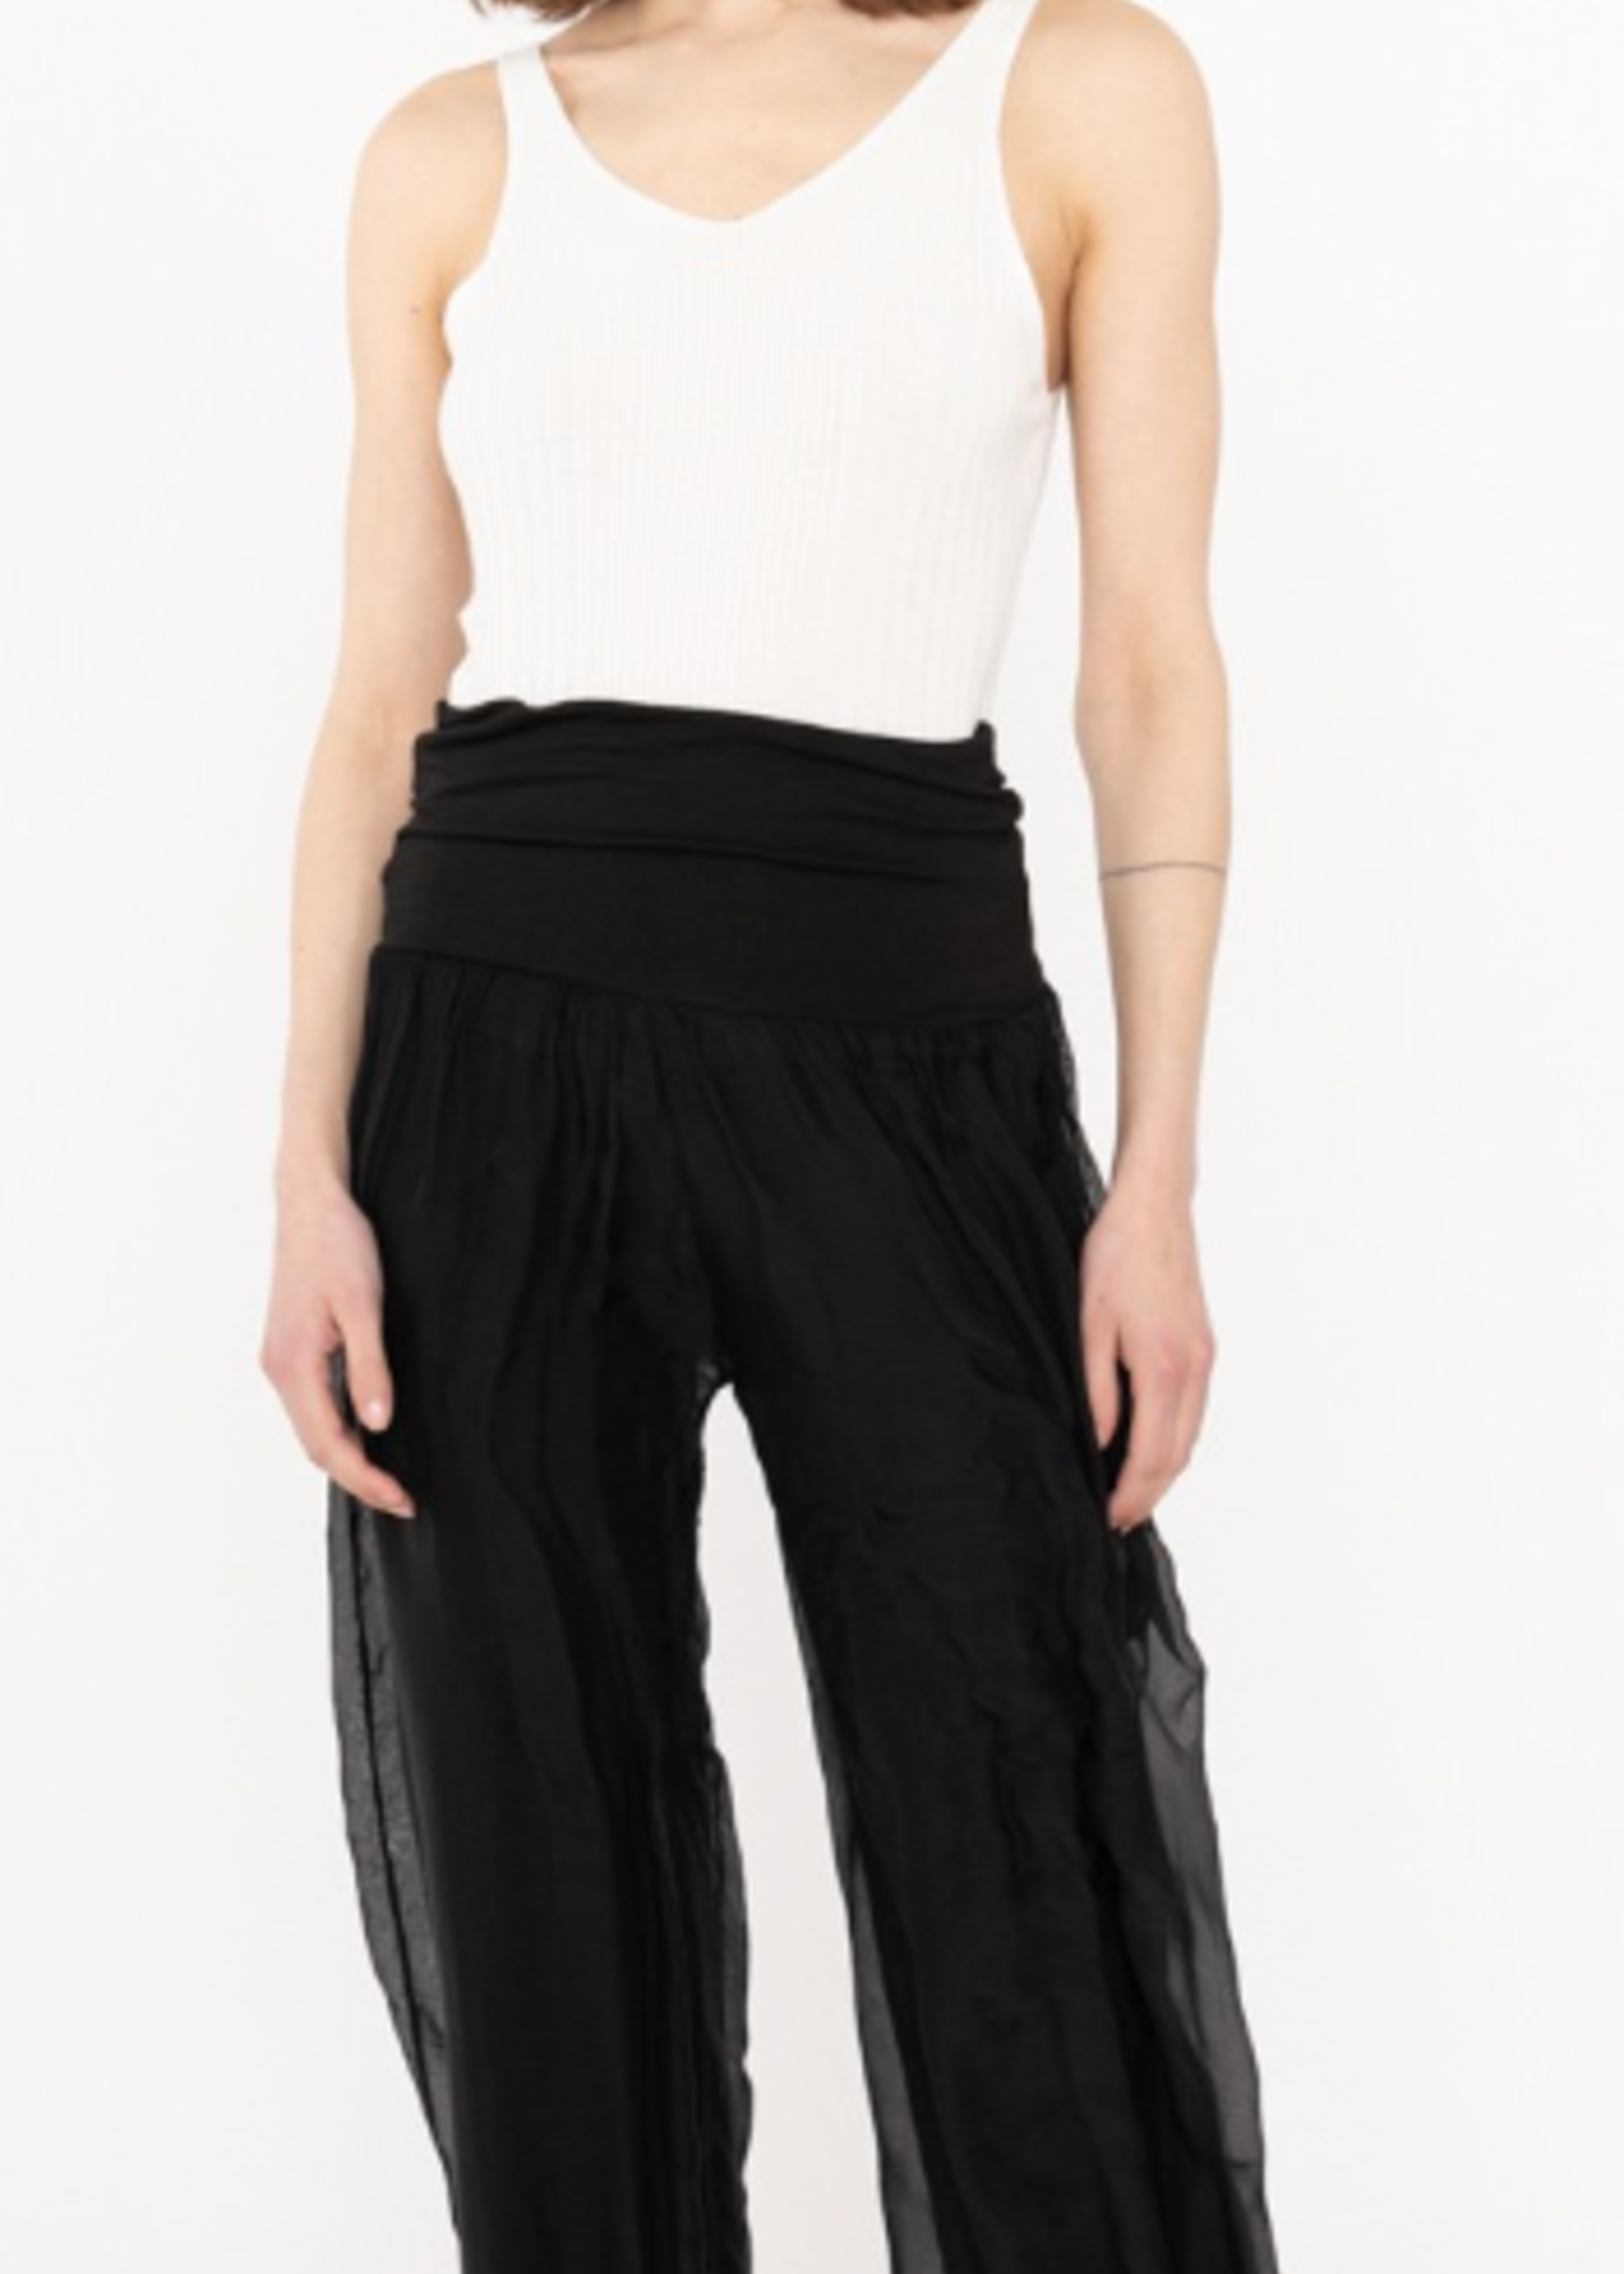 Silk overlay pant +5 colors